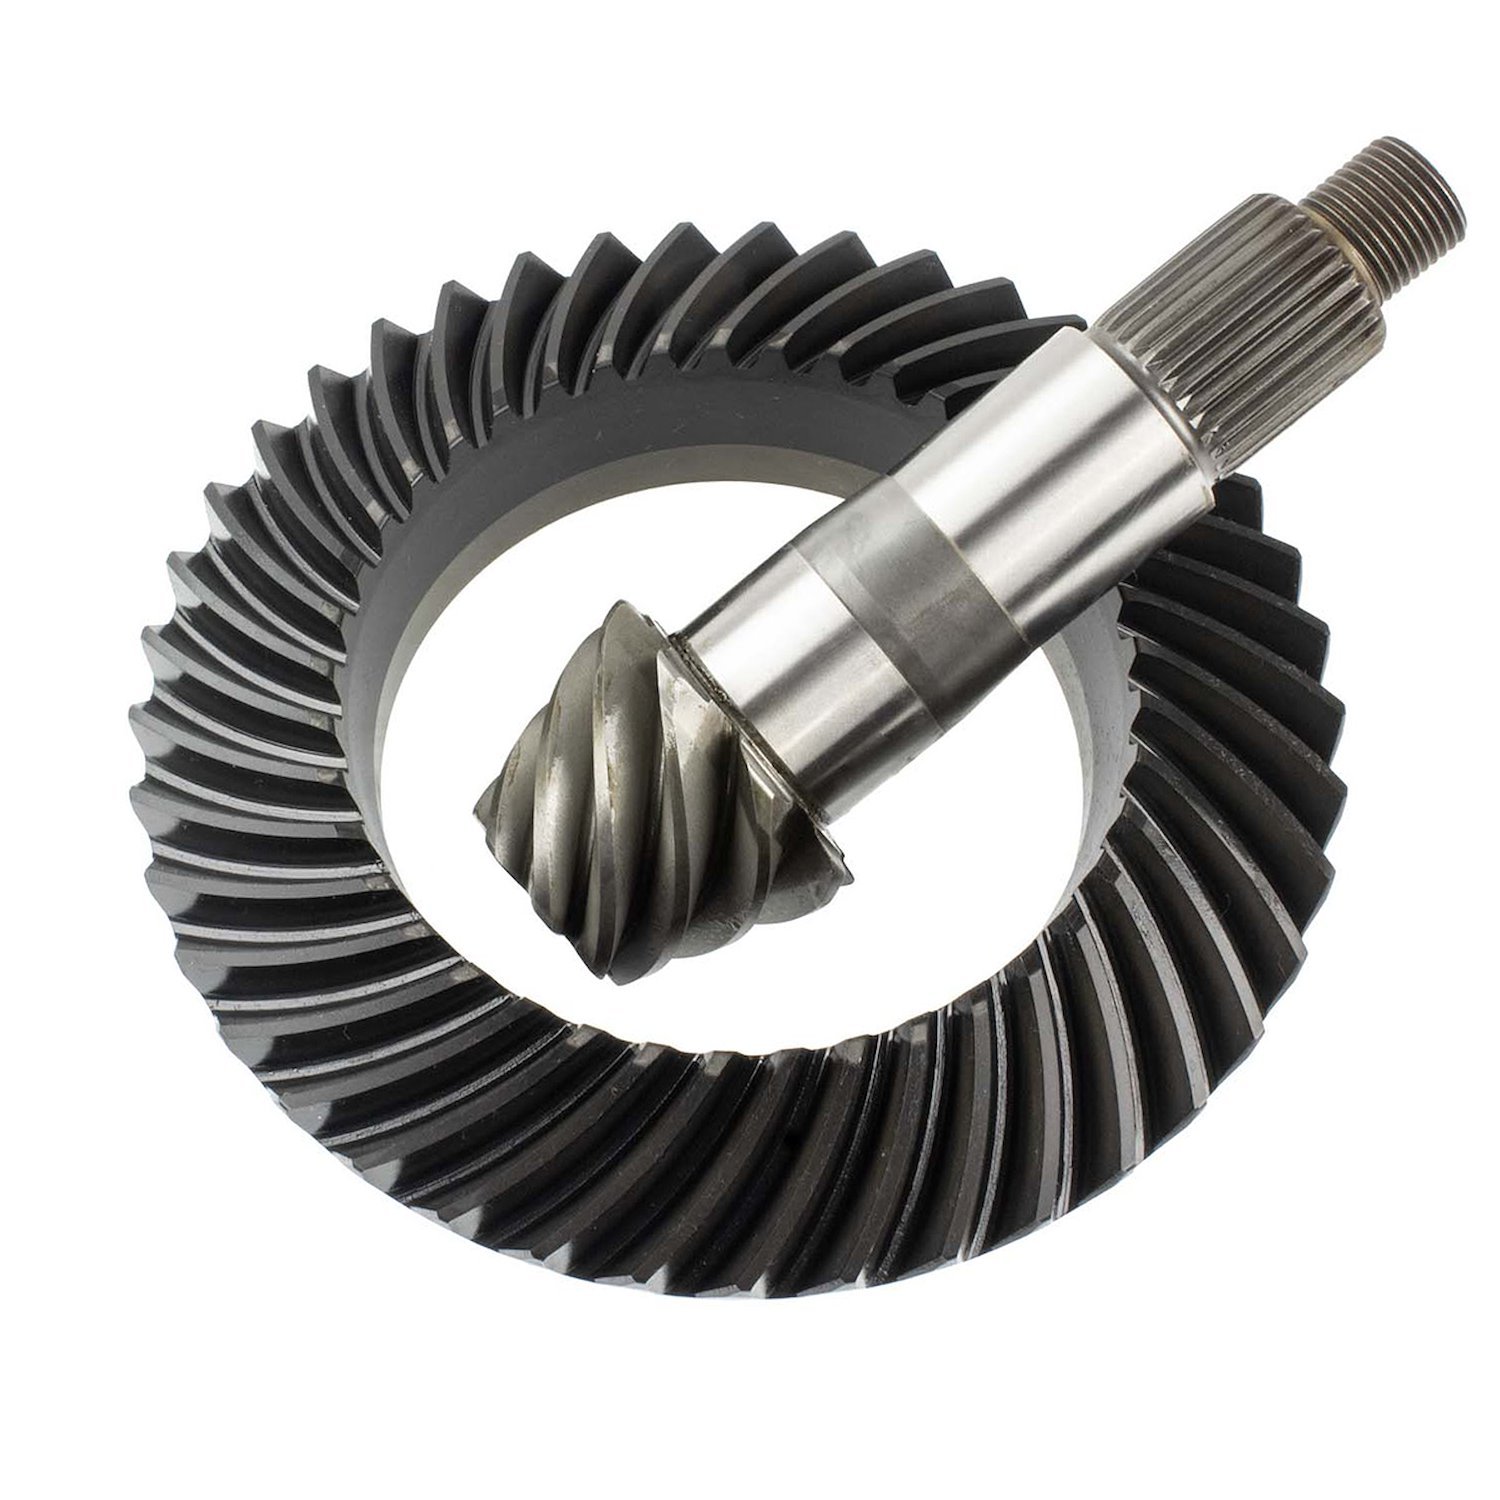 Ring & Pinion Gears for Jeep Wrangler JL - Ratio: 5.13